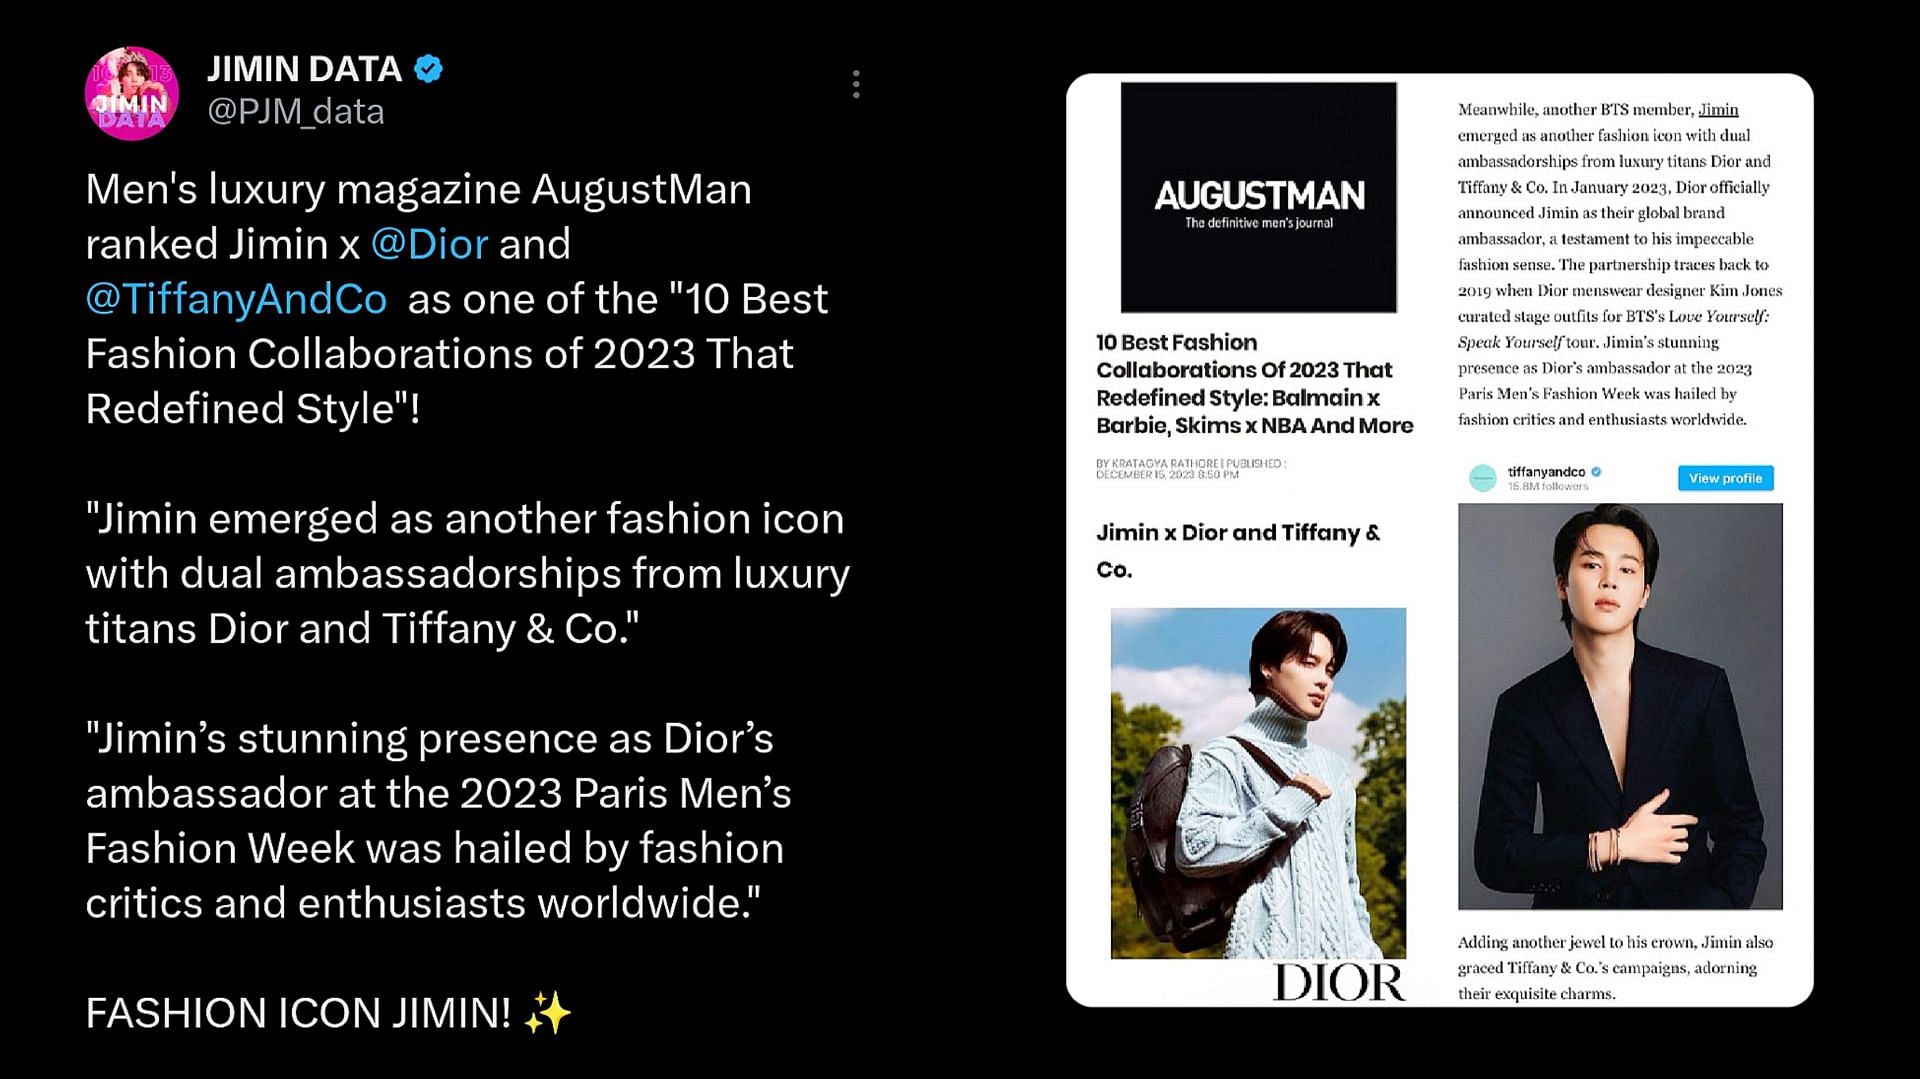 Fans react as Jimin&#039;s Dior &amp; Tiffany &amp; Co ranks one of the 10 Best Fashion Collaborations Of 2023 That Redefined Style by AUGUSTMAN (Image via X)